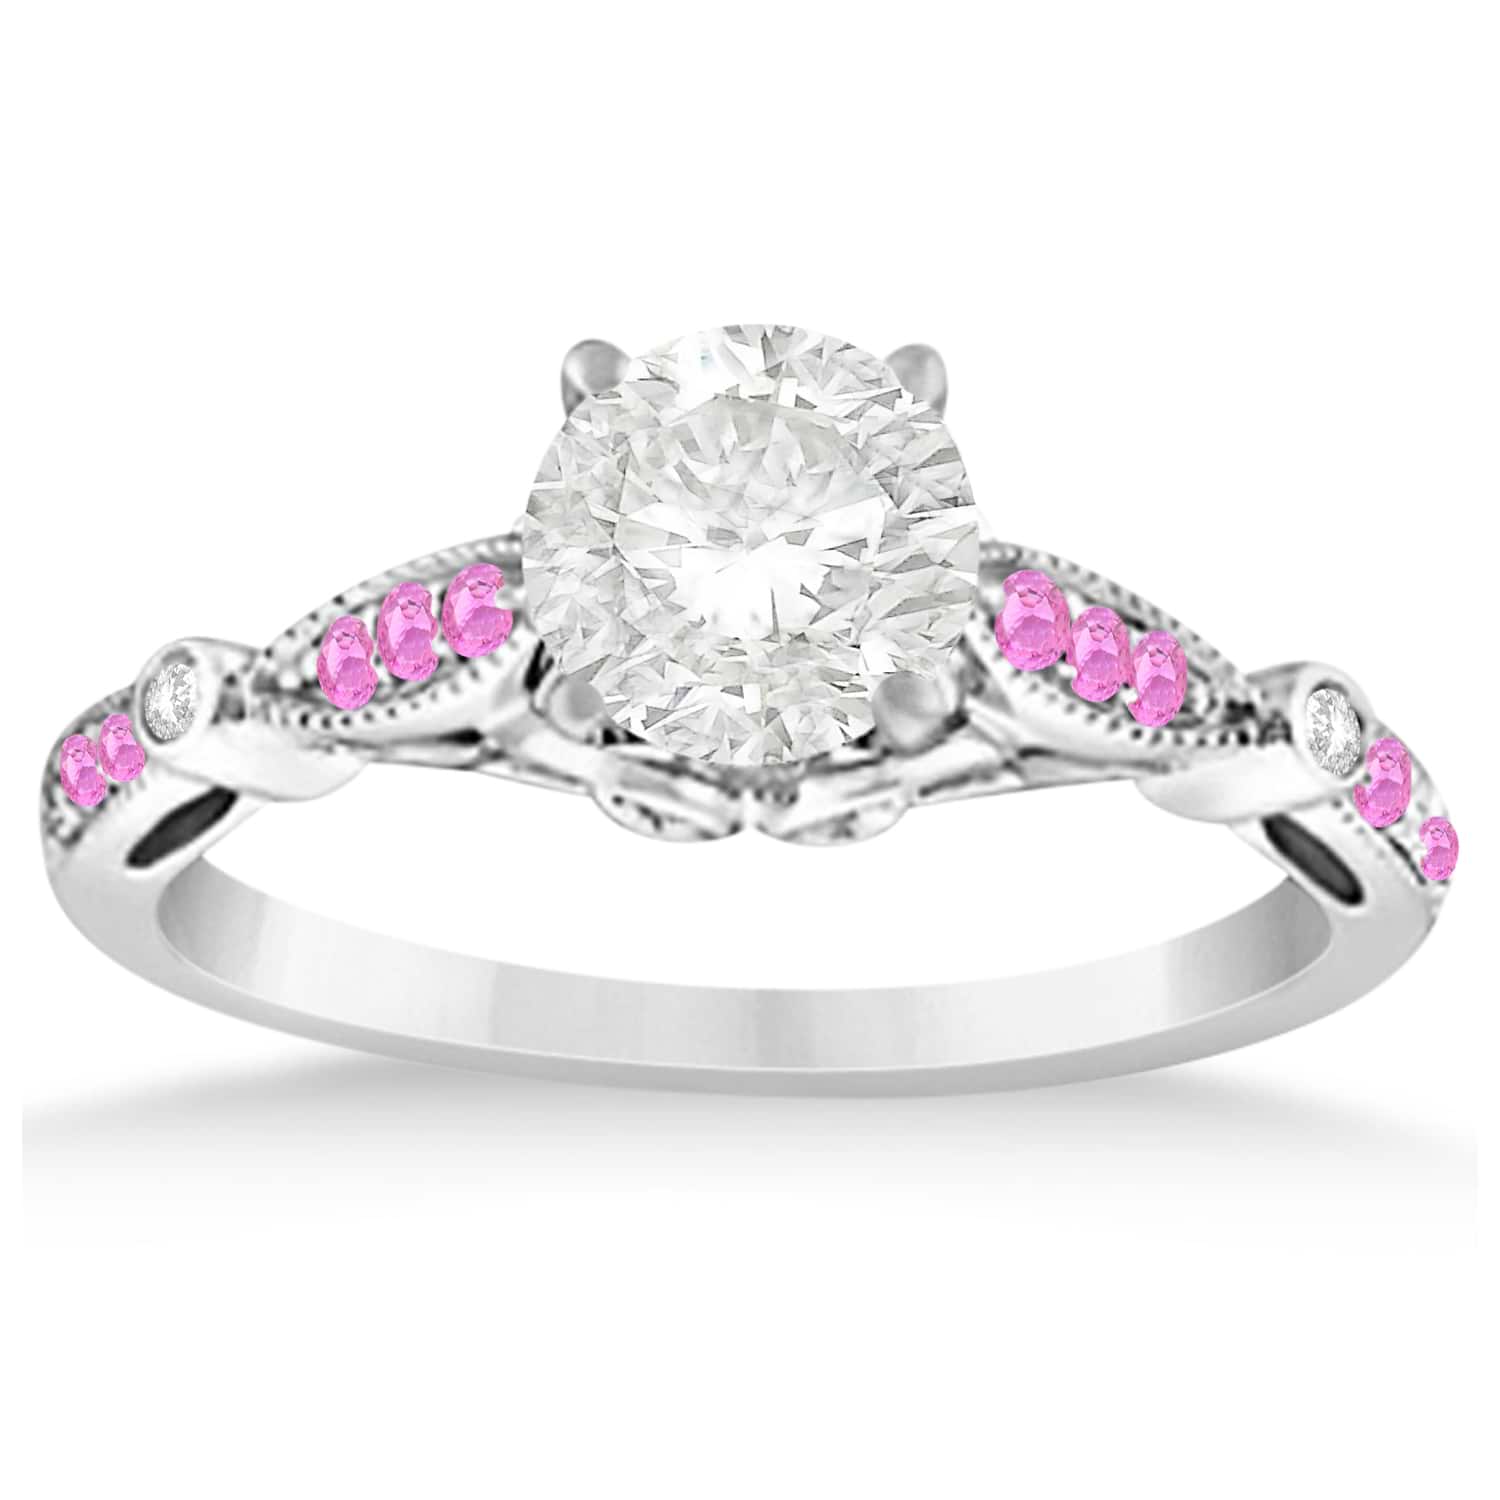 Marquise & Dot Pink Sapphire Vintage Engagement Ring 14k White Gold 0.13ct